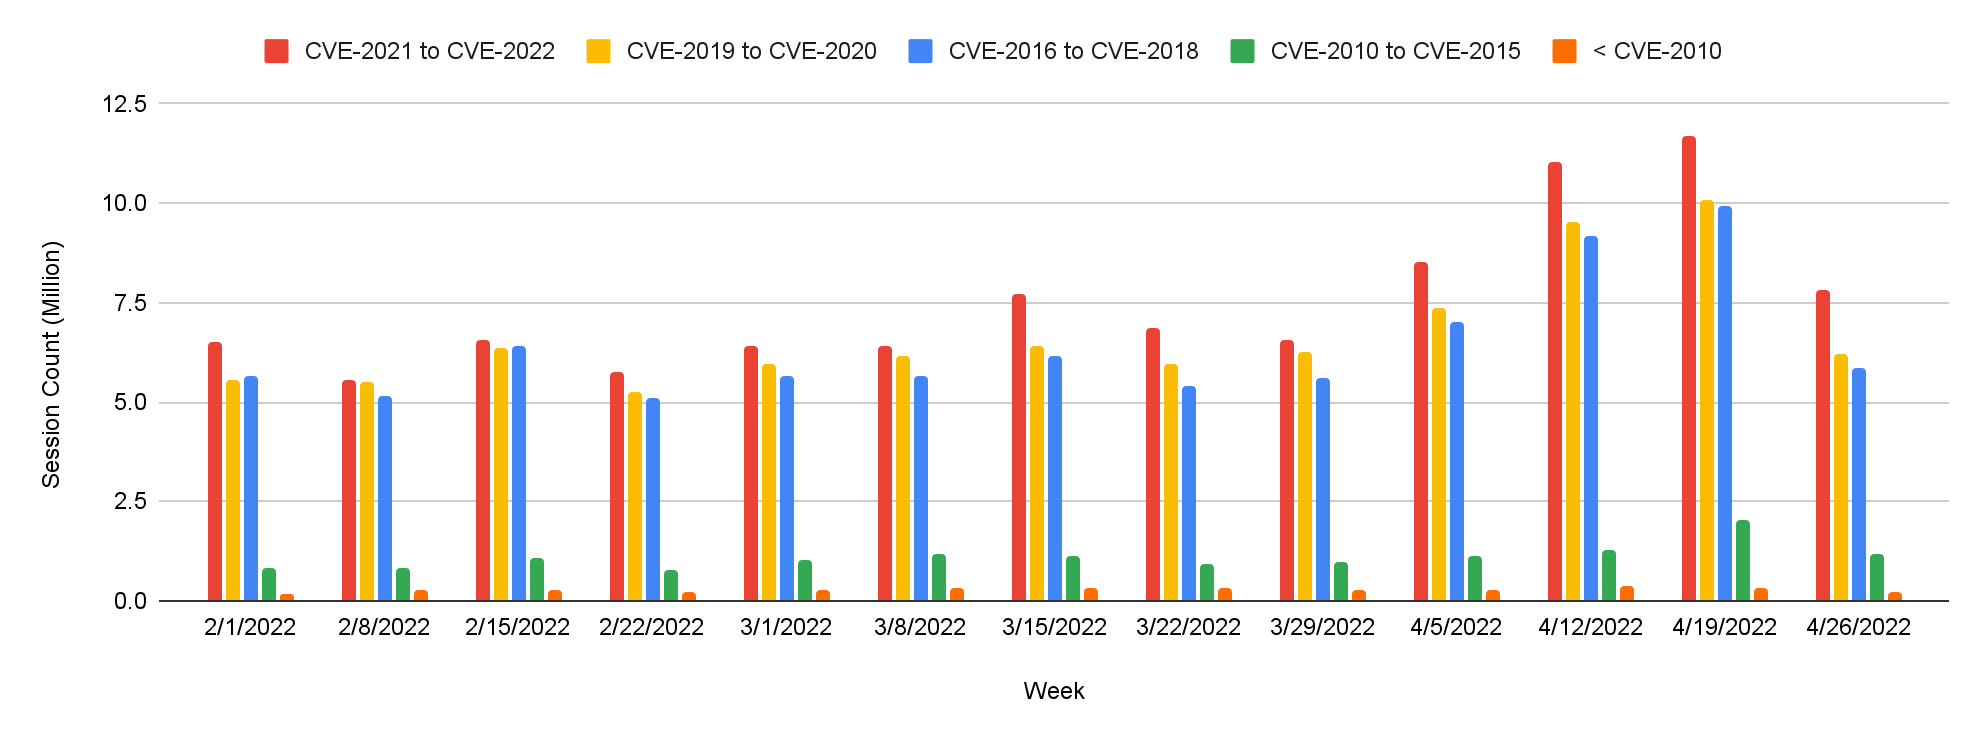 Red = CVEs disclosed 2021-2022, yellow = CVEs disclosed 2019-2020, blue = CVEs disclosed 2016-2018, green = CVEs disclosed 2010-2015, orange = CVEs disclosed prior to 2010. The bar graph shows attack severity distribution by millions of sessions divided weekly between February-April 2022. 